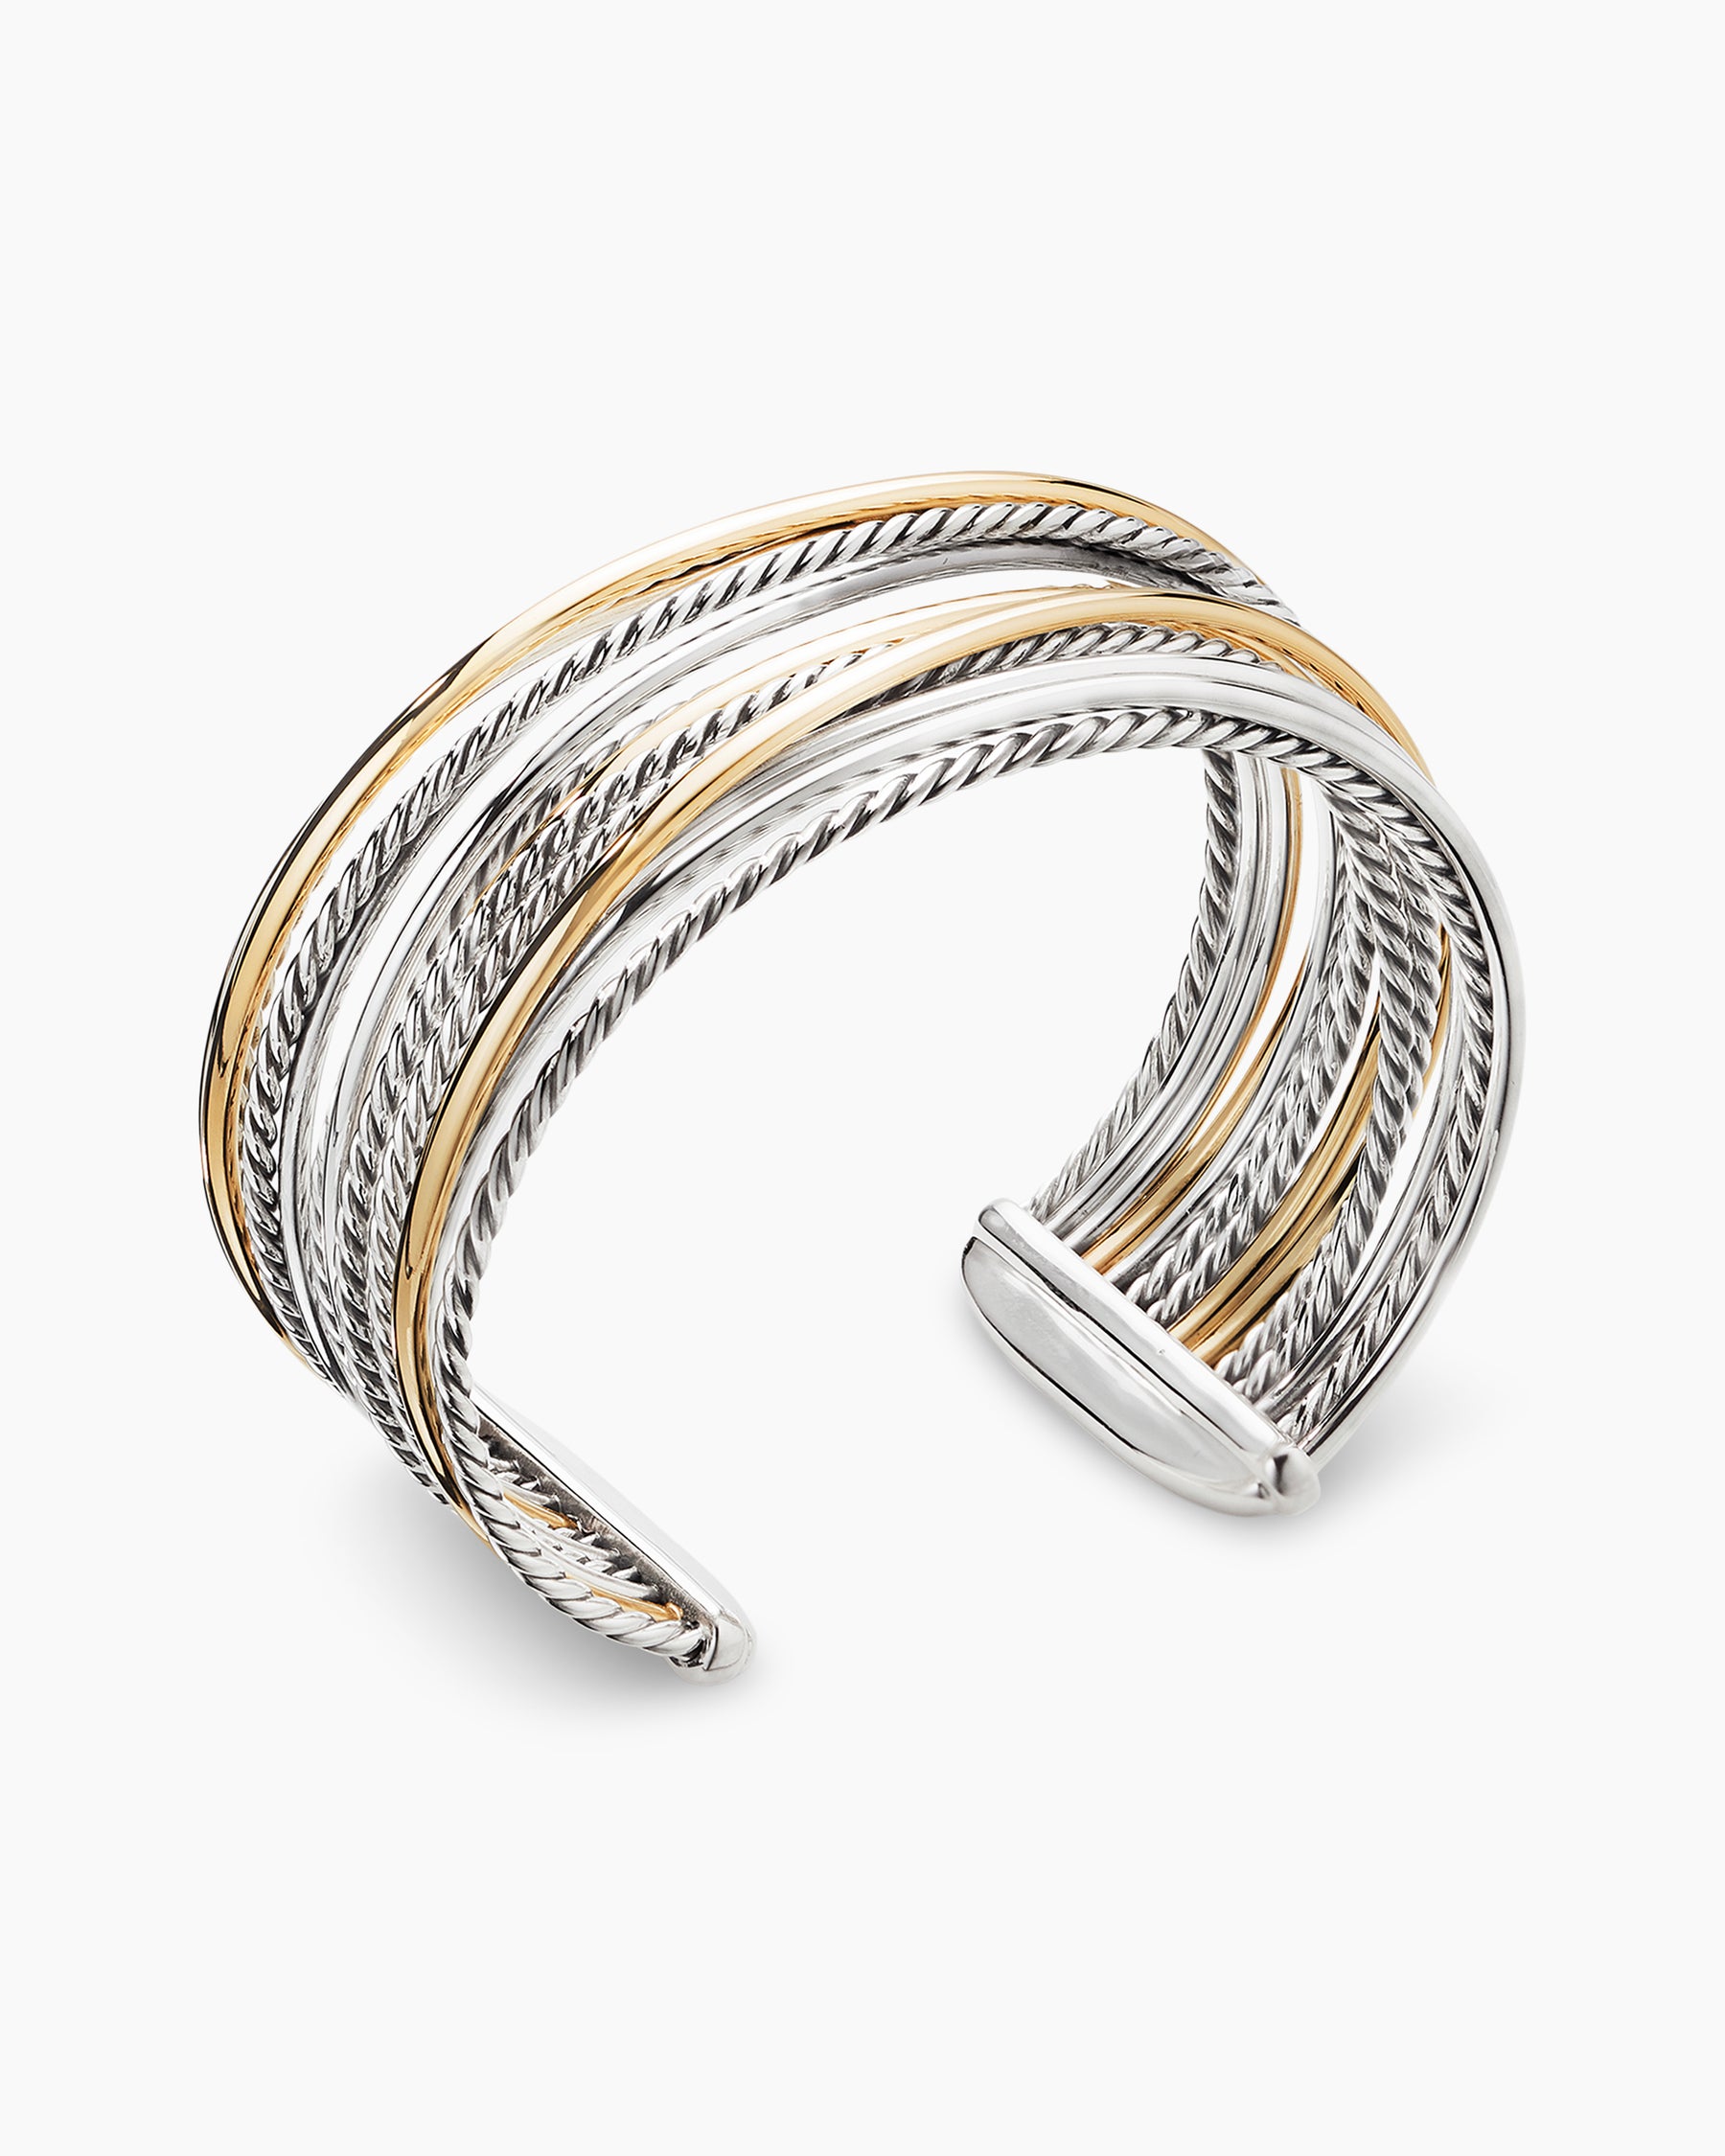 Crossover Two Row Cuff Bracelet in Sterling Silver with 18K Yellow Gold, 5mm